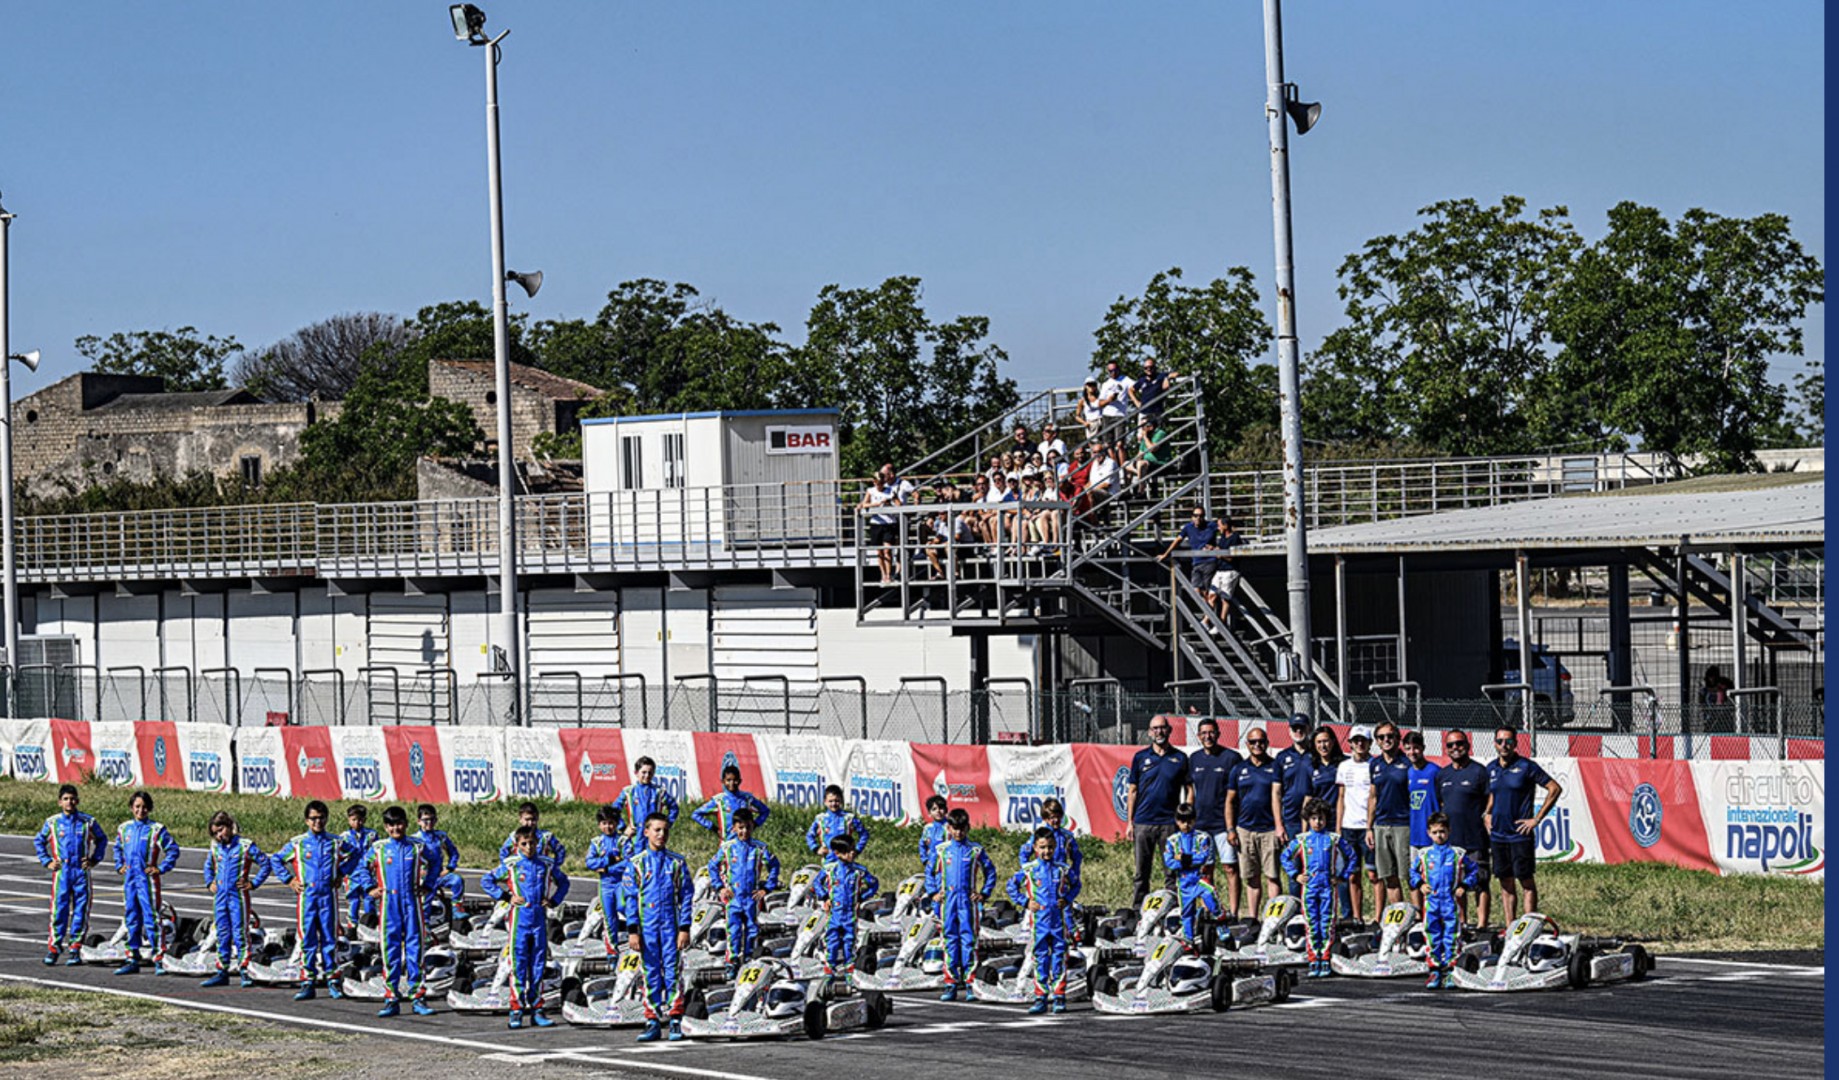 Kart Summer Camp organized by the Italian Karting Federation 